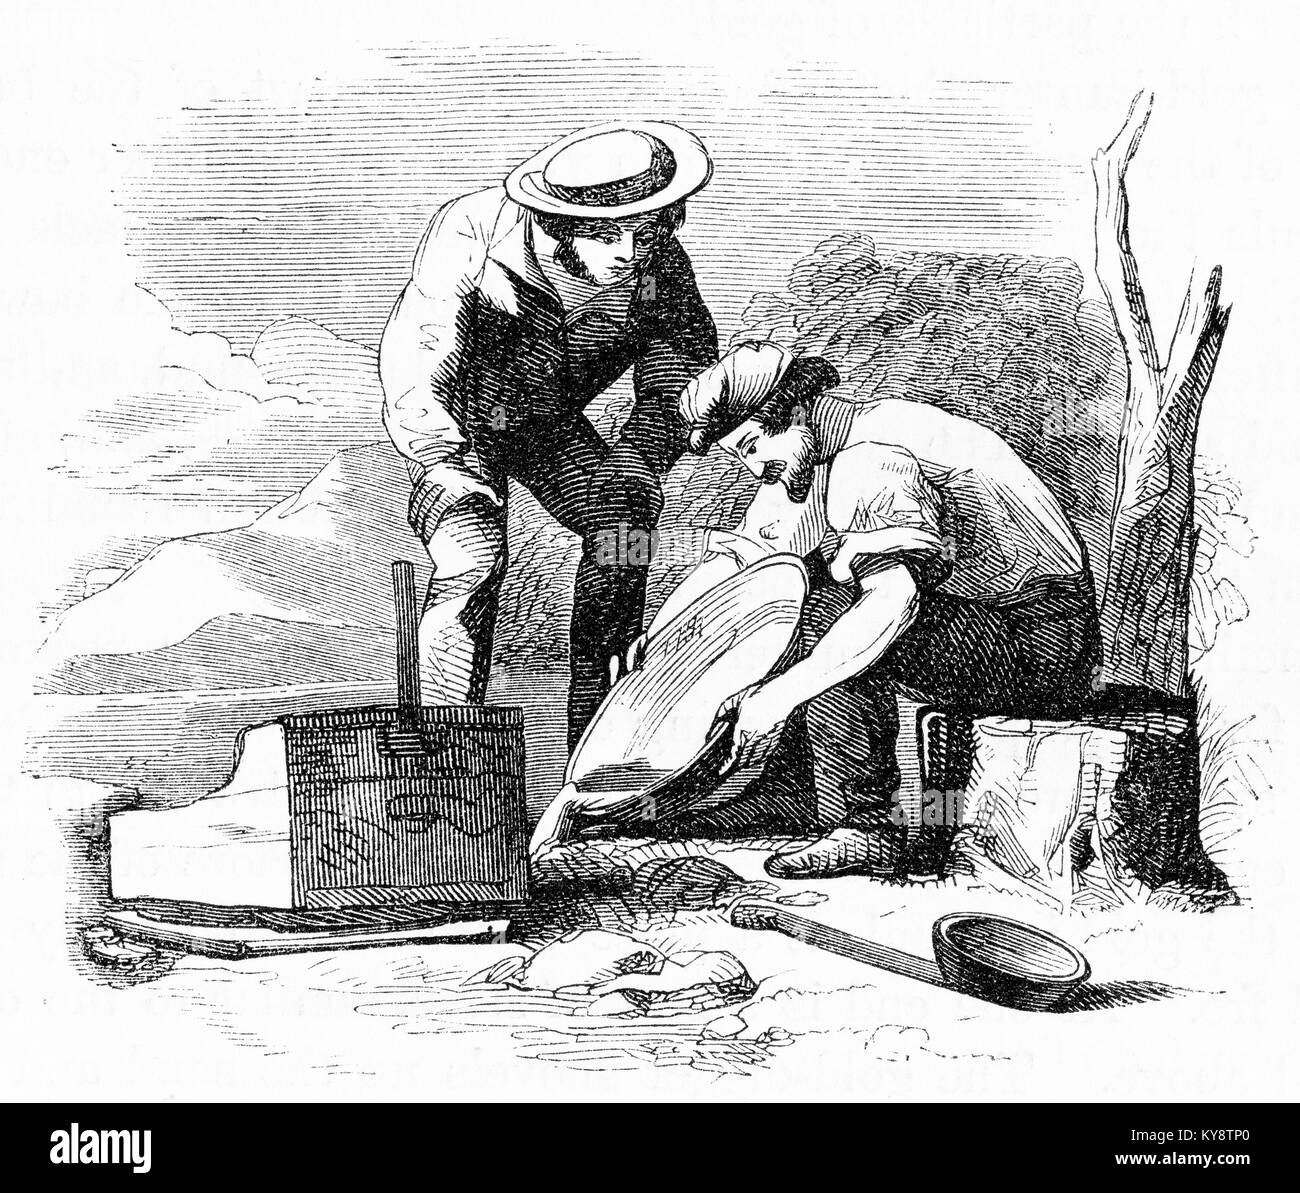 Engraving of two prospectors panning for gold in California. From an original engraving in the Harper's Story Books by Jacob Abbott, 1854. Stock Photo